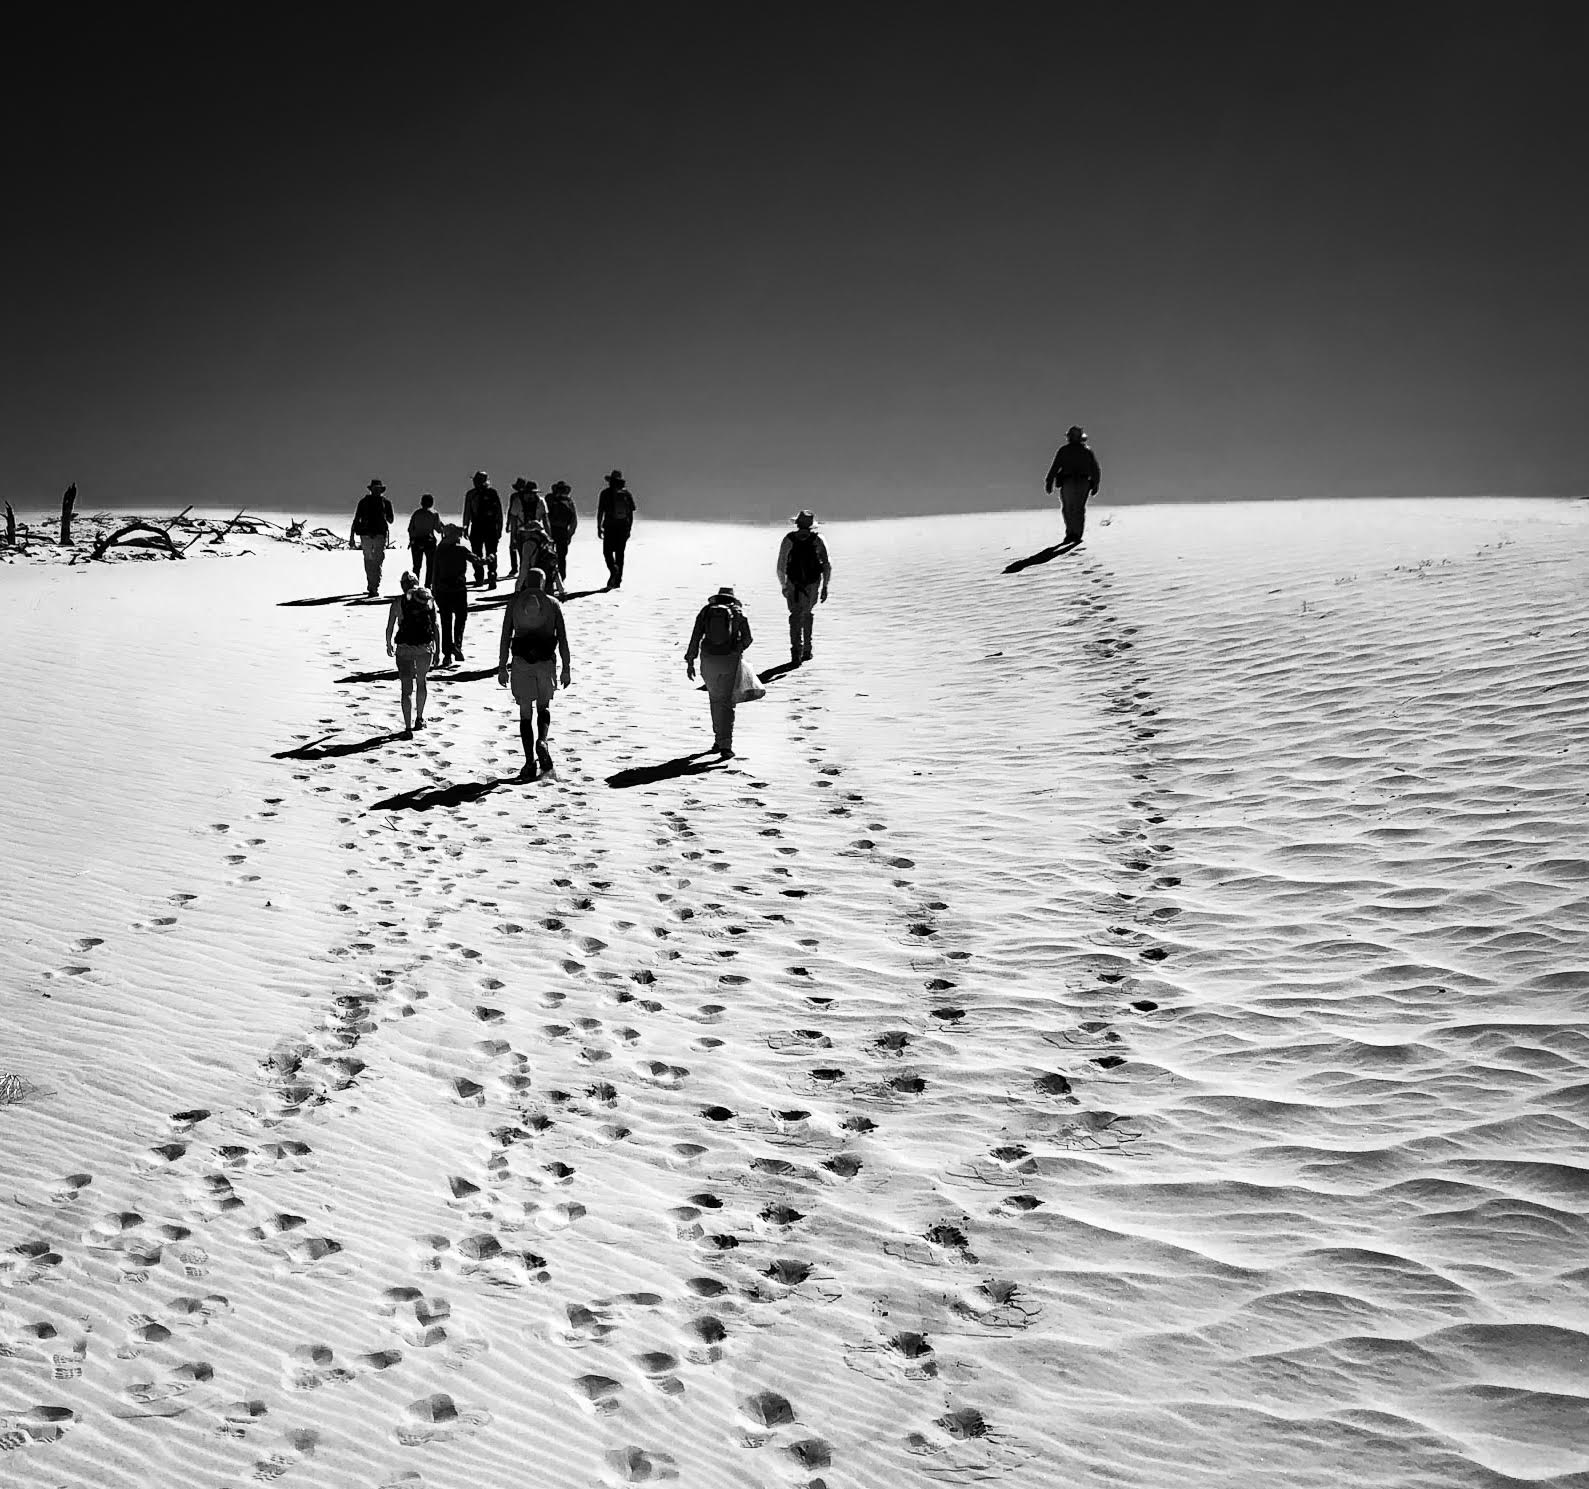 People walking on sand dunes in a black and white photo